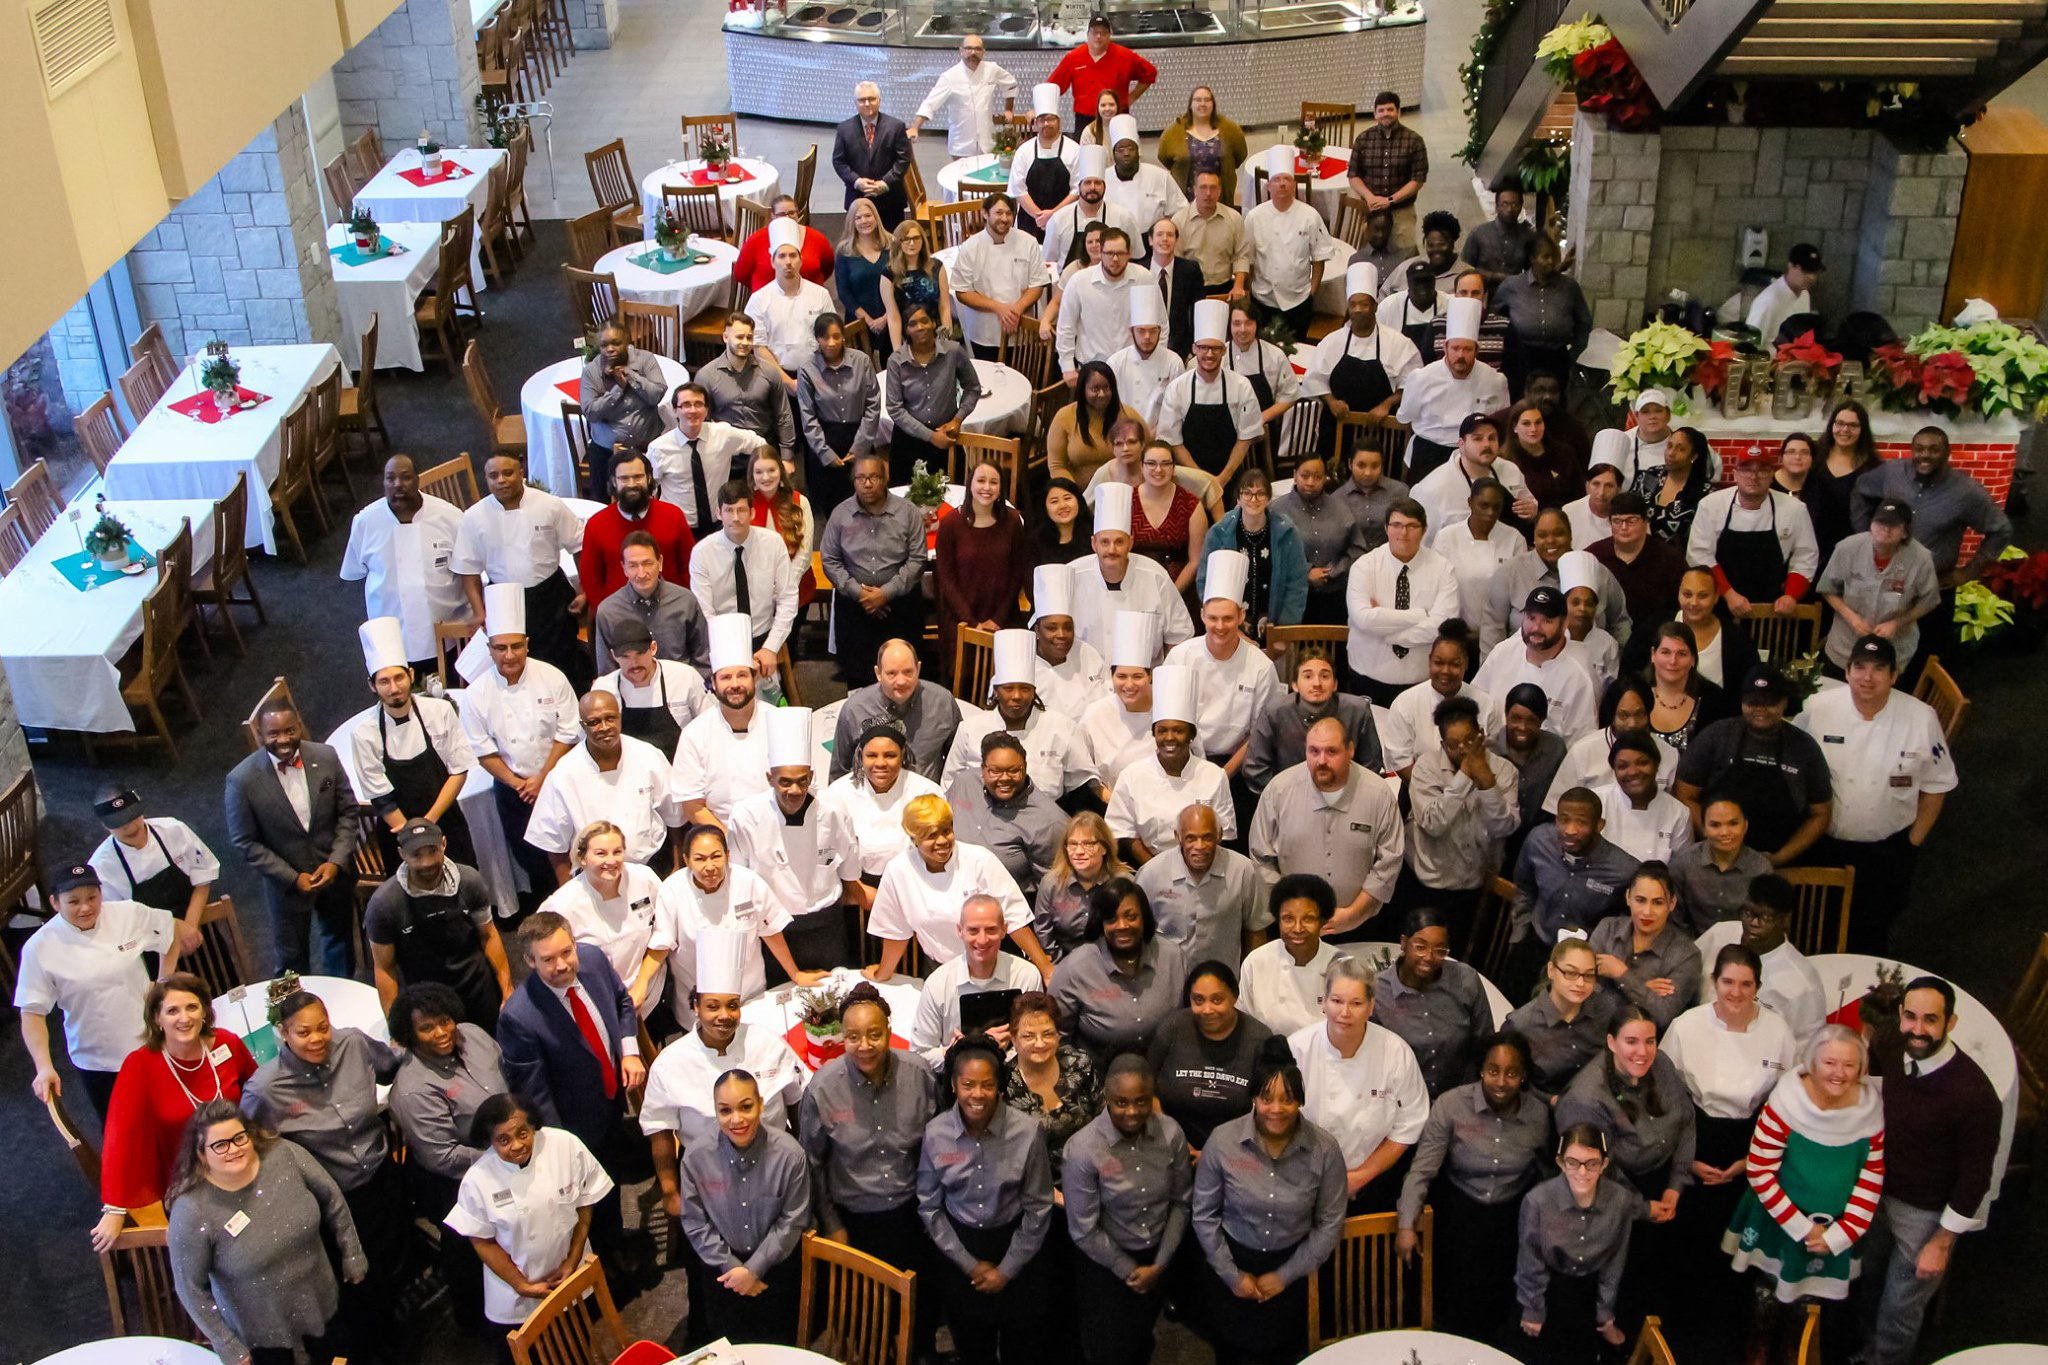 Group photo of dining employees.